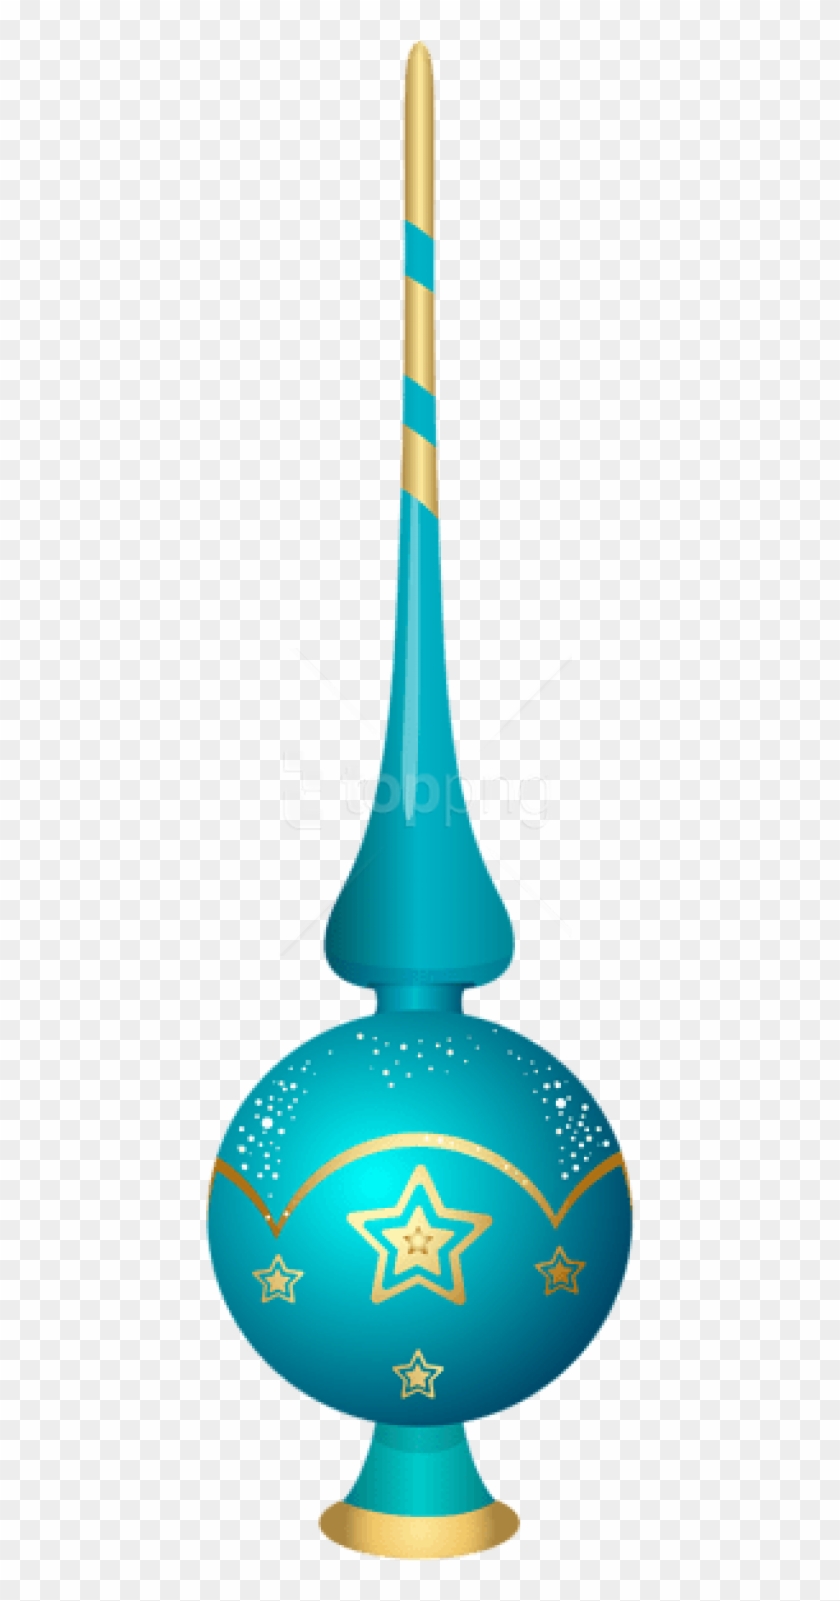 Free Png Blue Christmas Tree Top Ornament Png - Christmas Tree Top Png Clipart #4837161